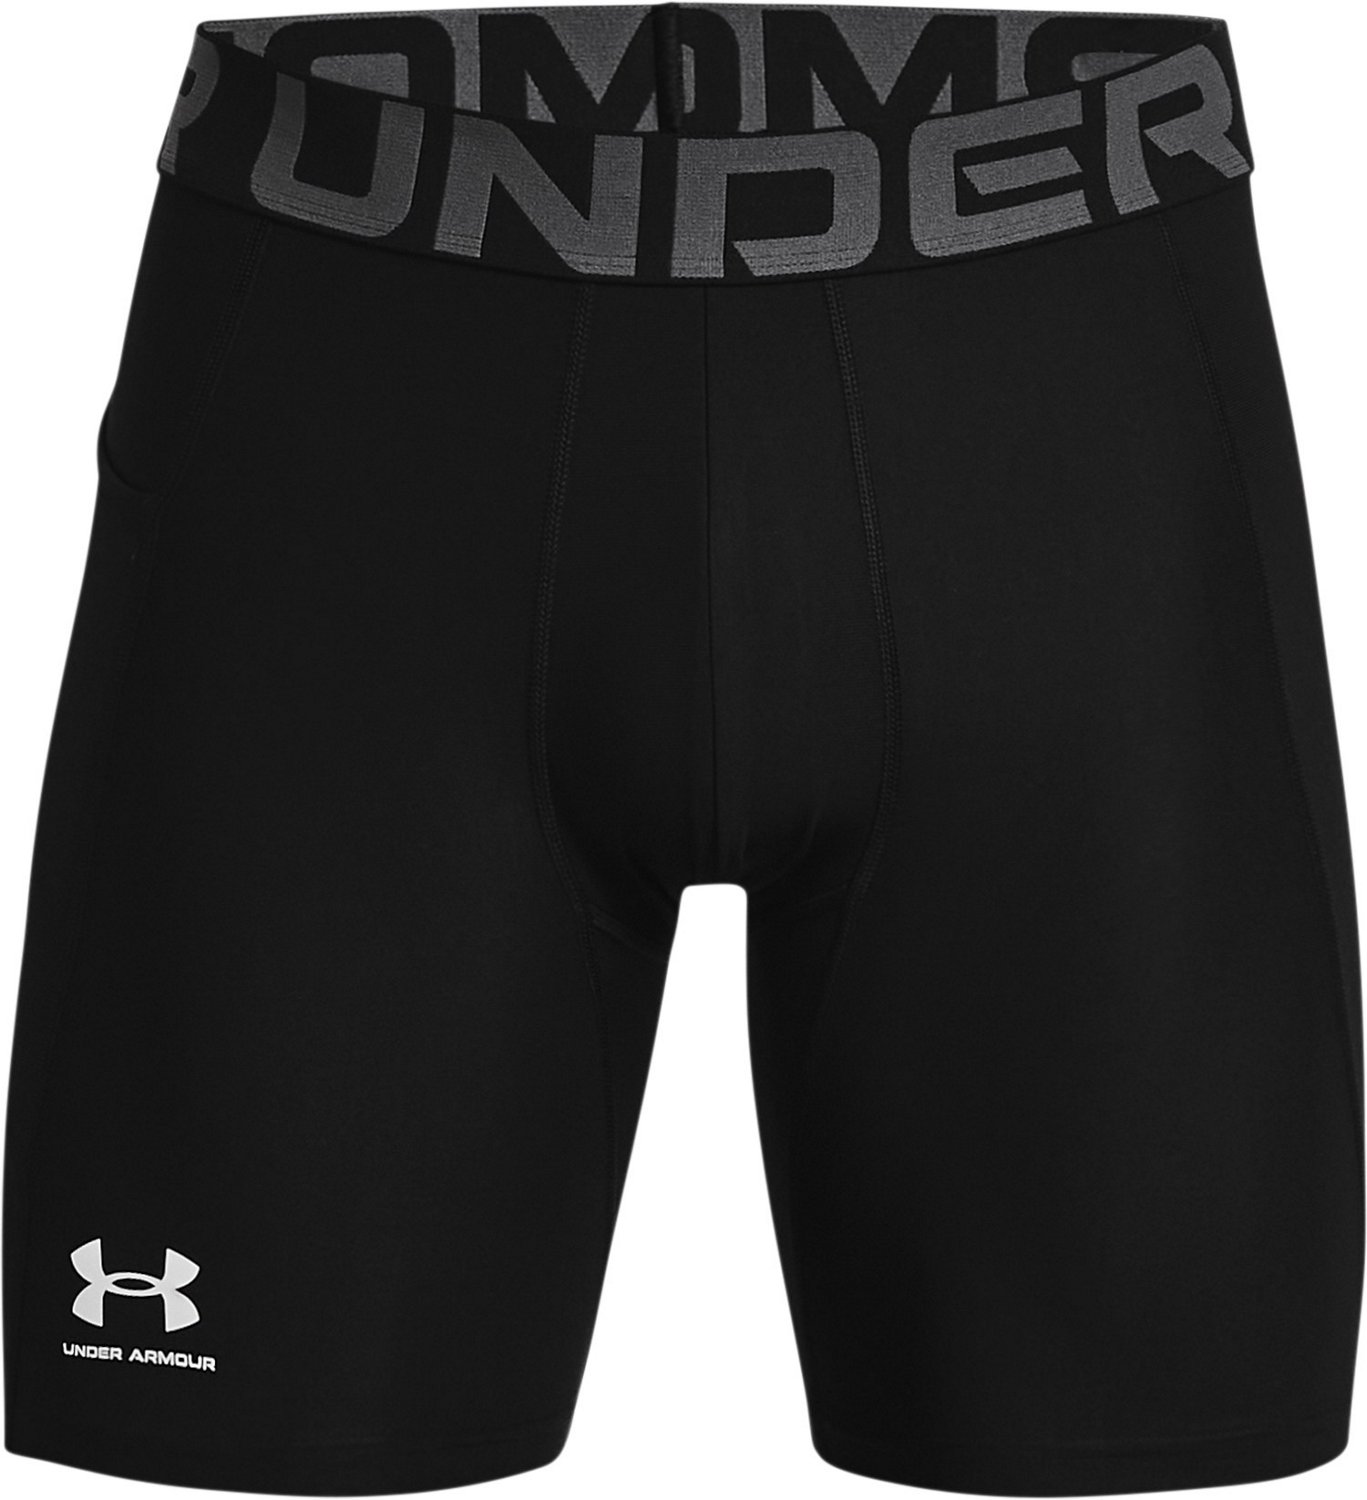 Under Armour Mens HeatGear Compression Shorts 6 in